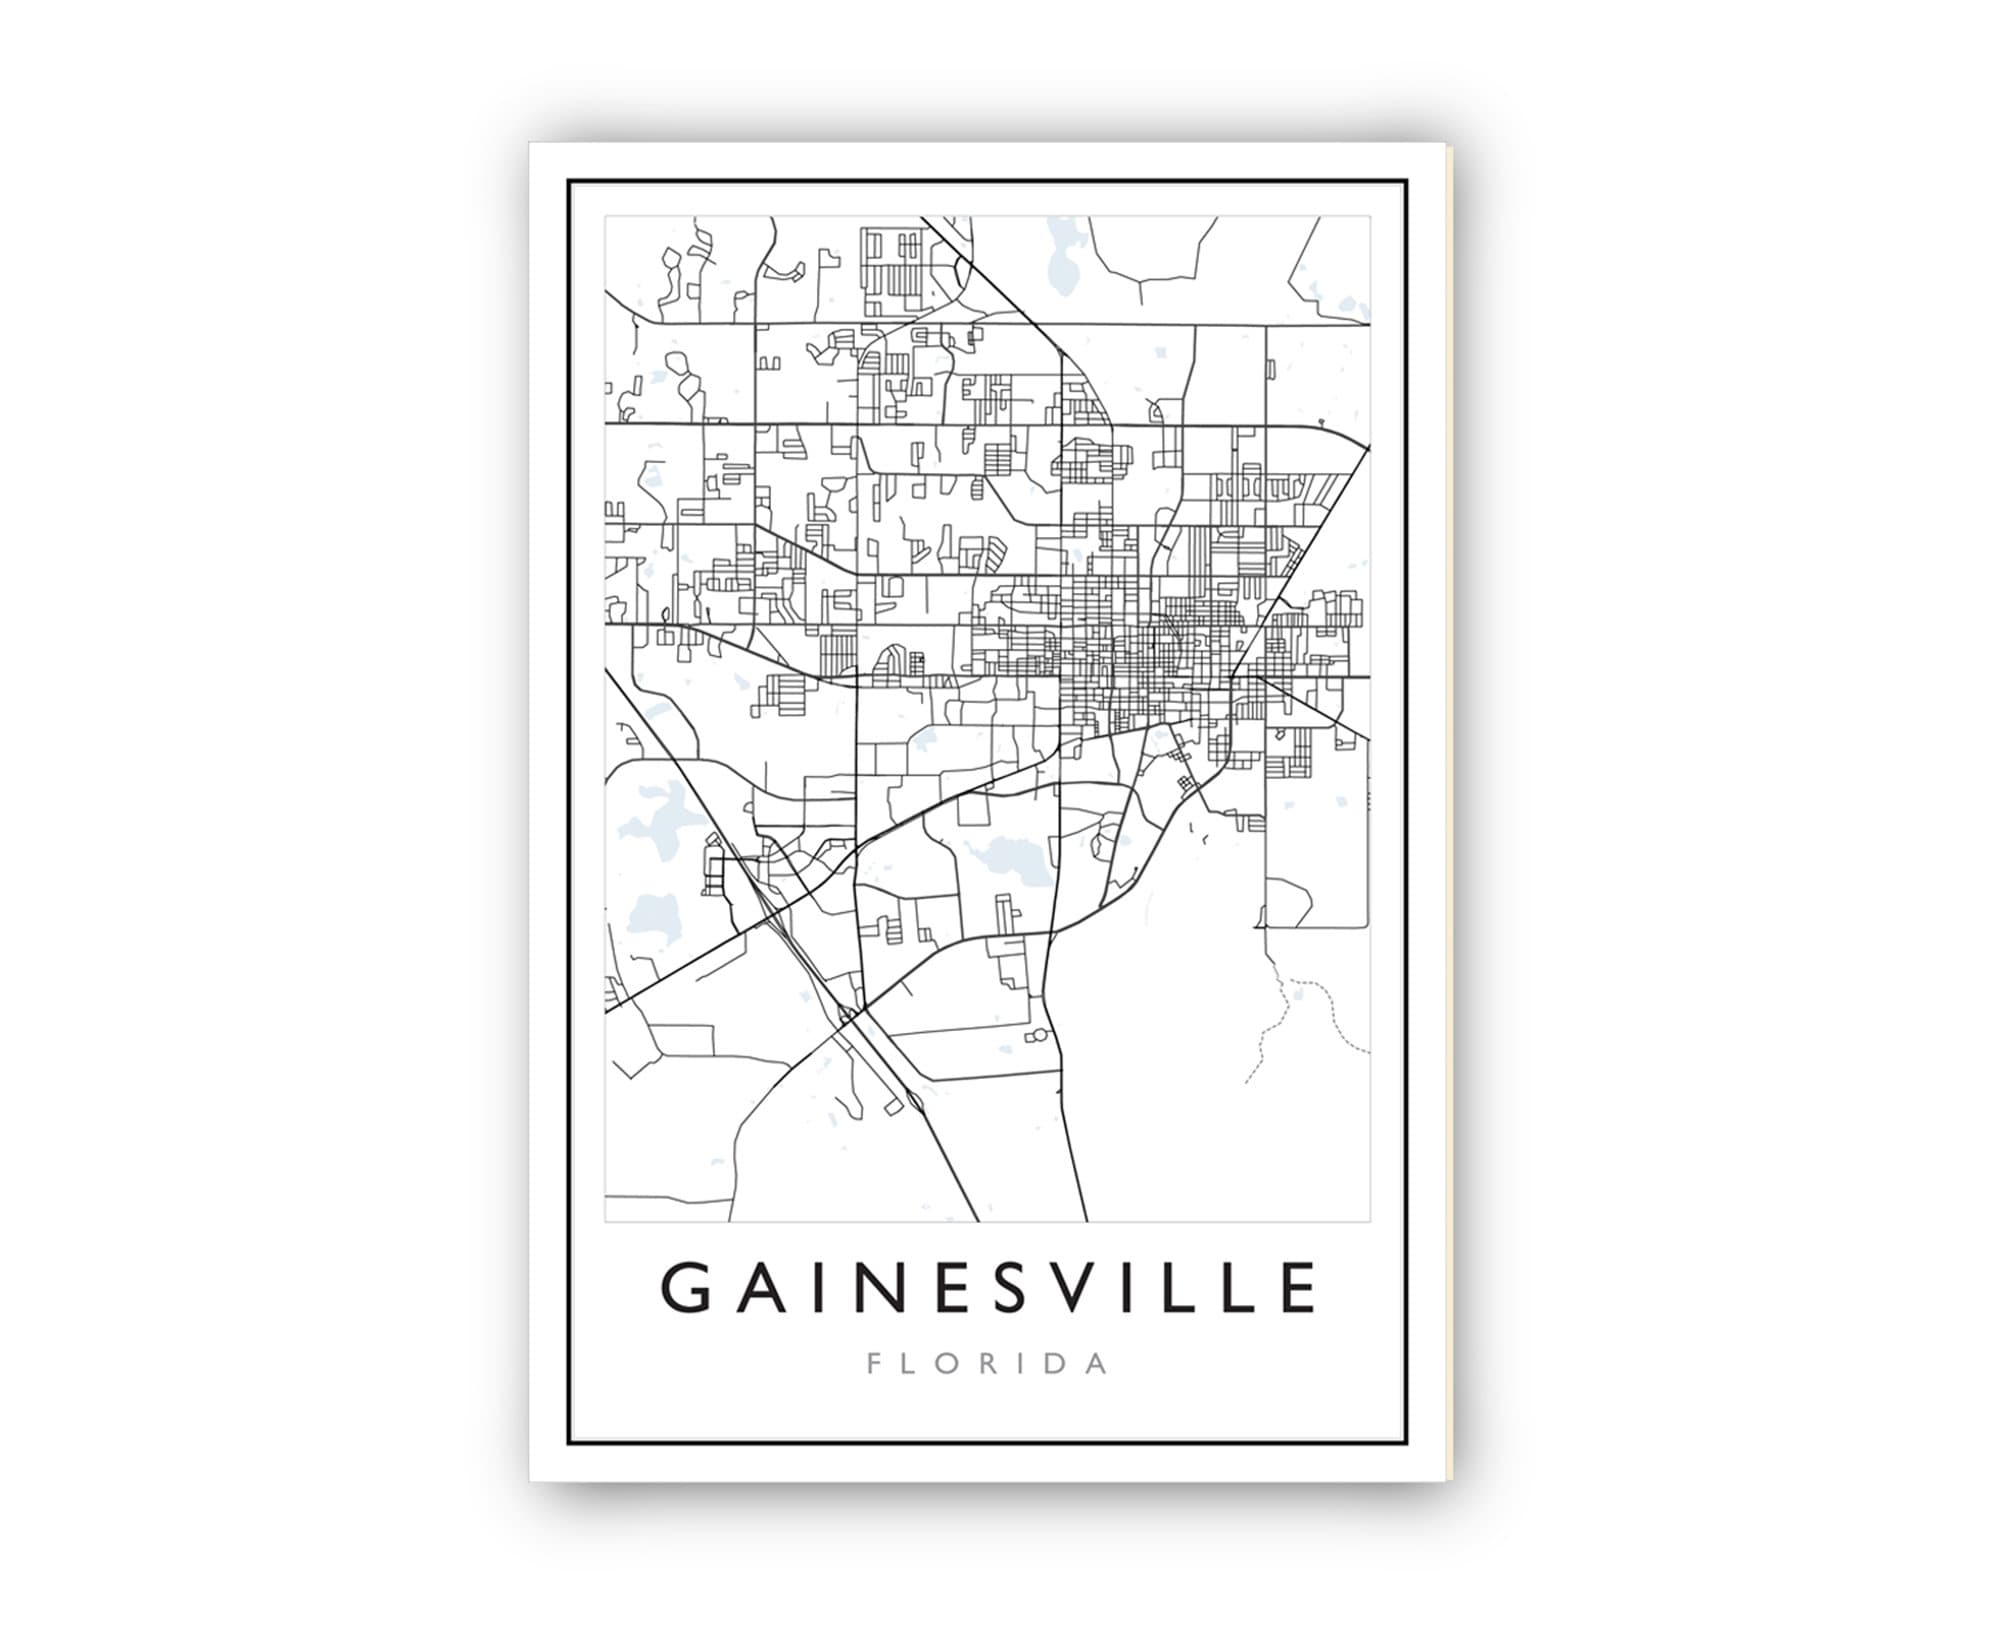 Gainesville Florida City Map, Florida City Road Map Poster, City Street Map Print, Modern US City Map, Home Art Decoration, Office Wall Art